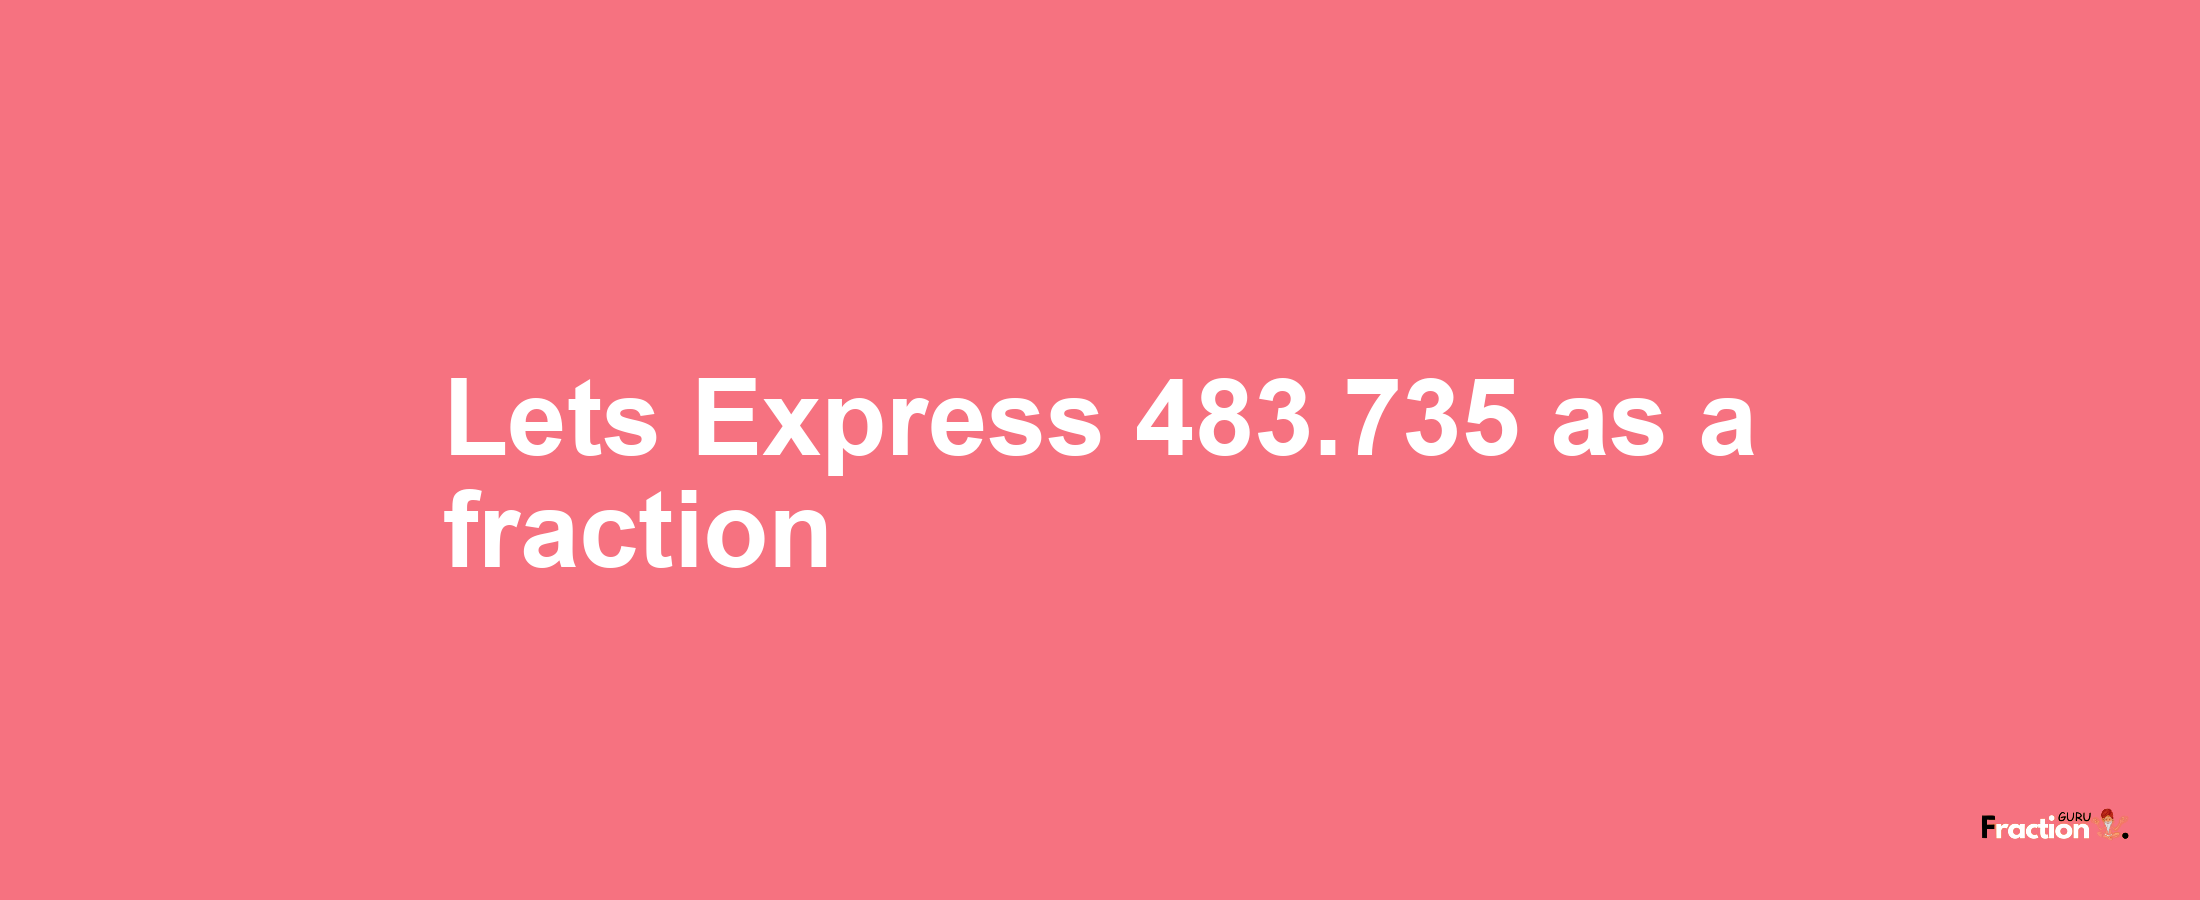 Lets Express 483.735 as afraction